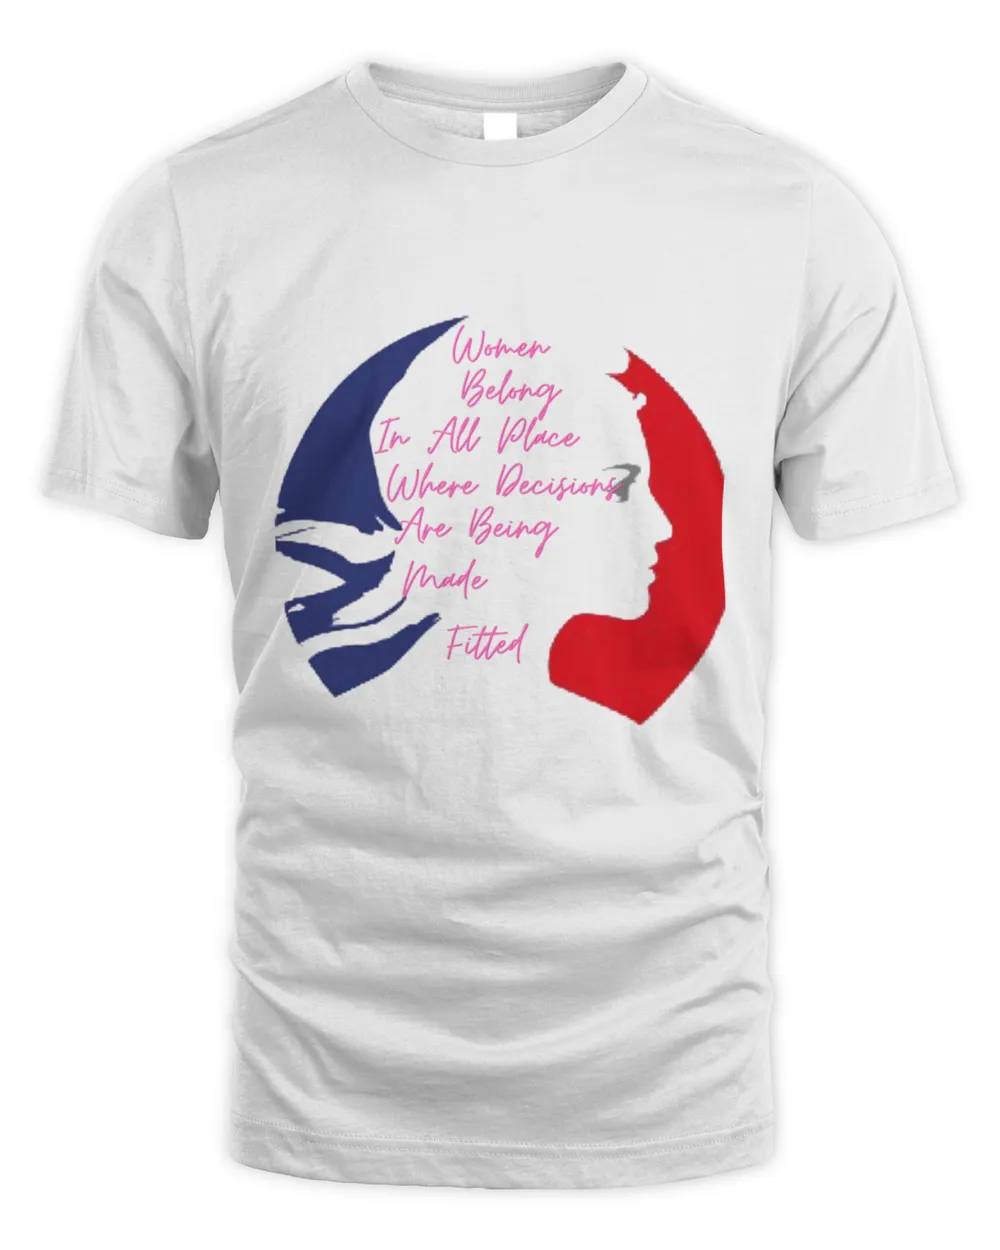 Women Belong In All Place Where Decisions Are Being Made Fitted  We dont want woman to feel inferior but equal to men13 T-Shirt